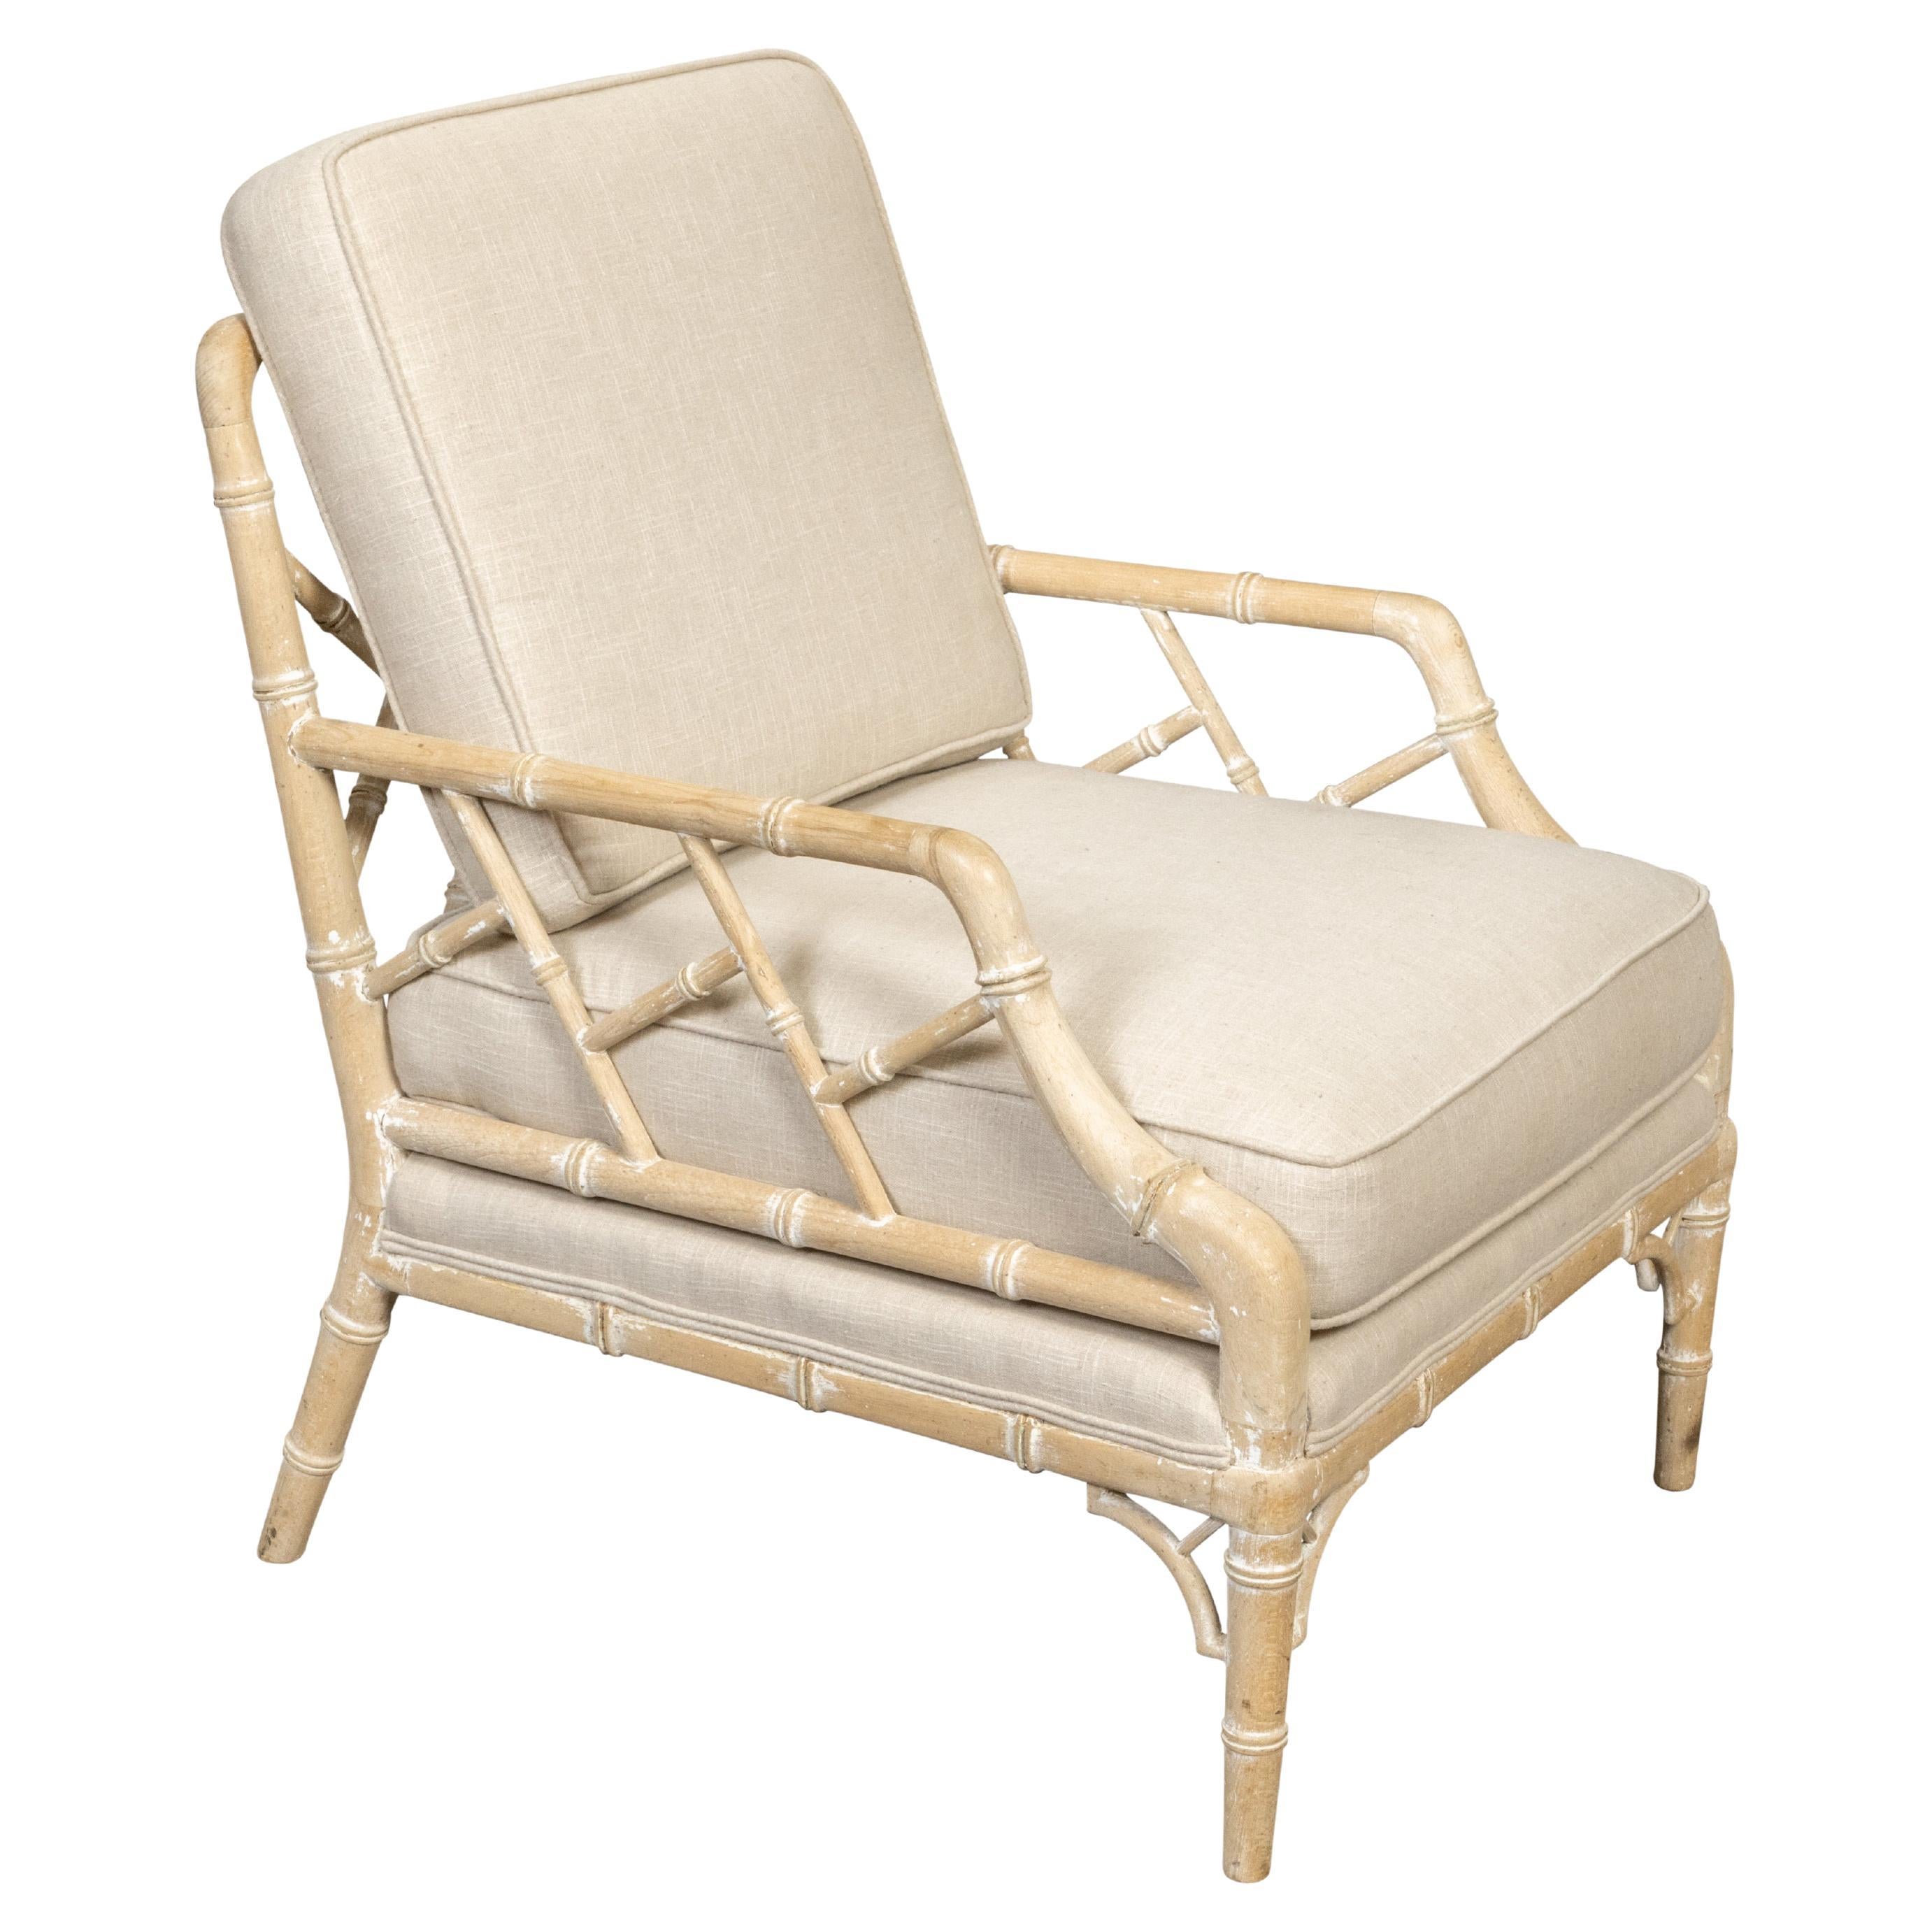 English Midcentury Bleached Faux Bamboo Lounge Chair with Upholstery